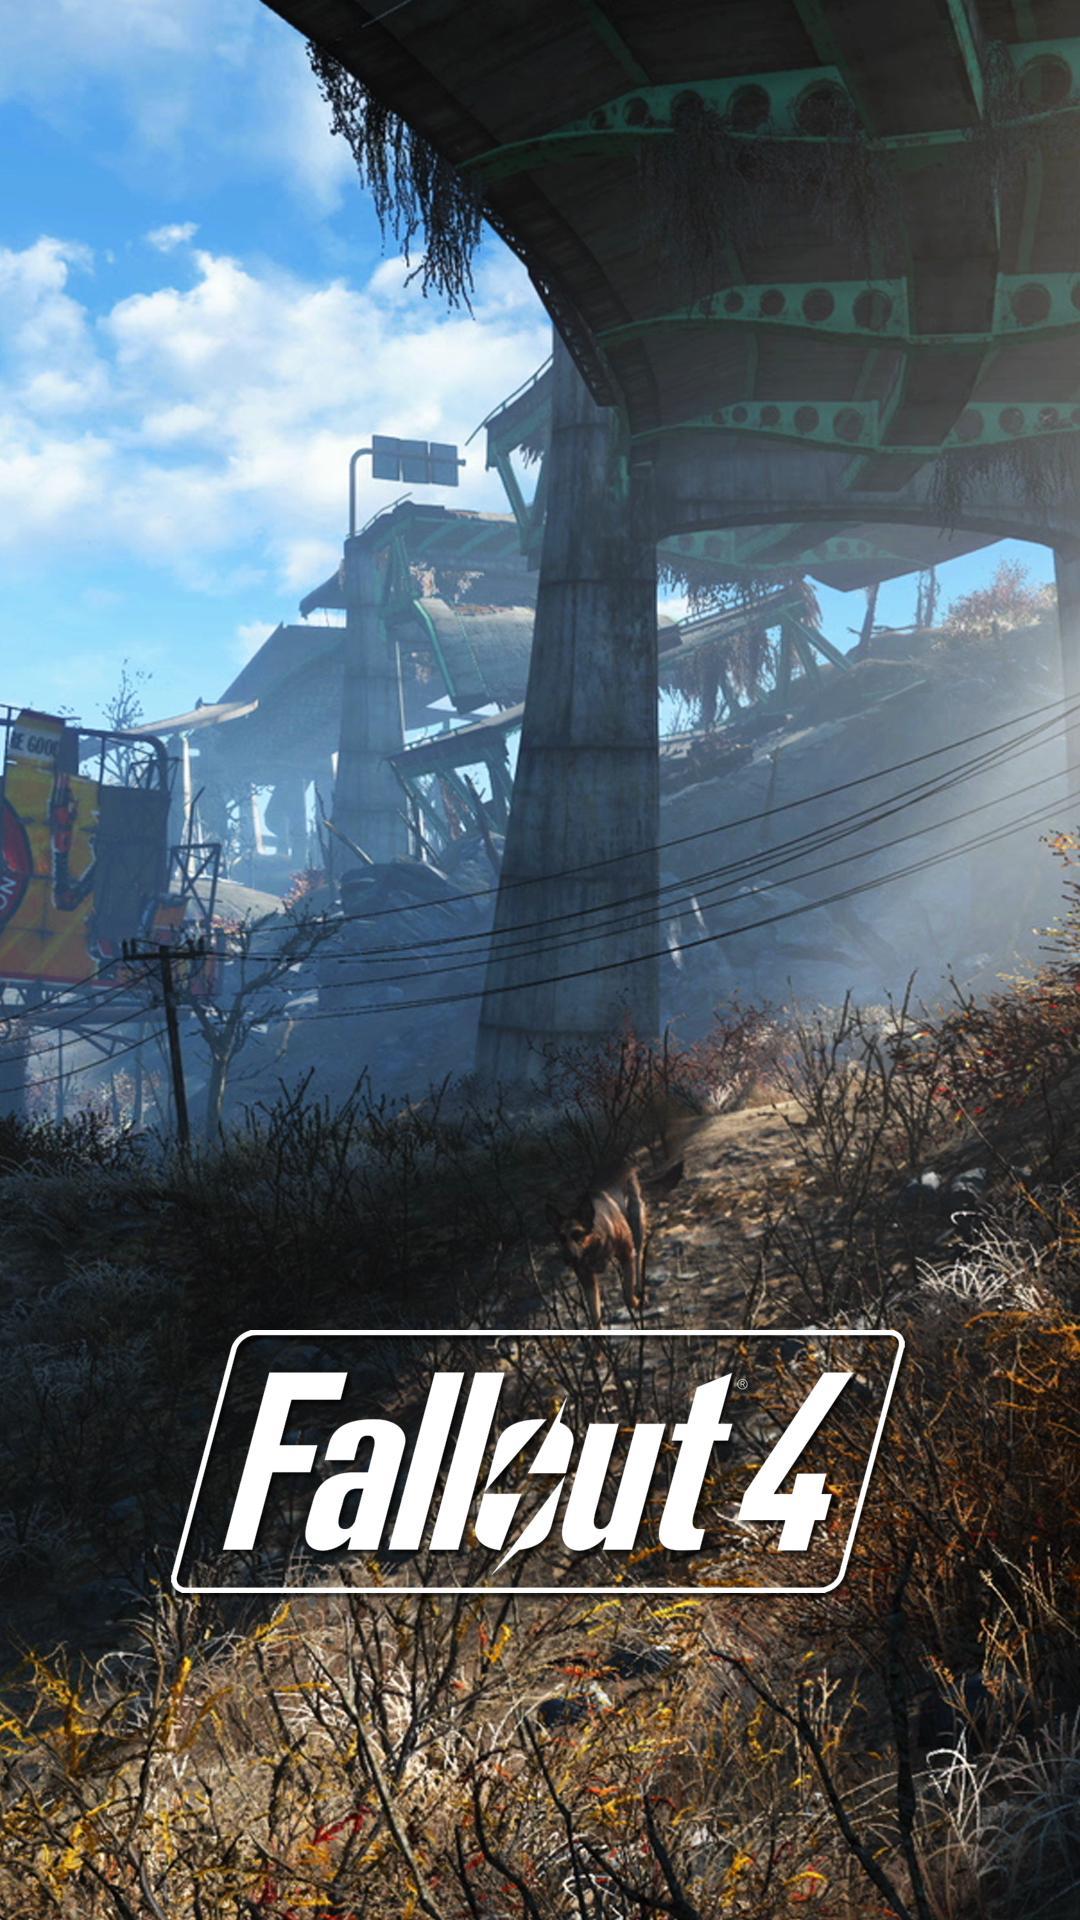 I made some Fallout 4 lock screen wallpaper from E3 stills